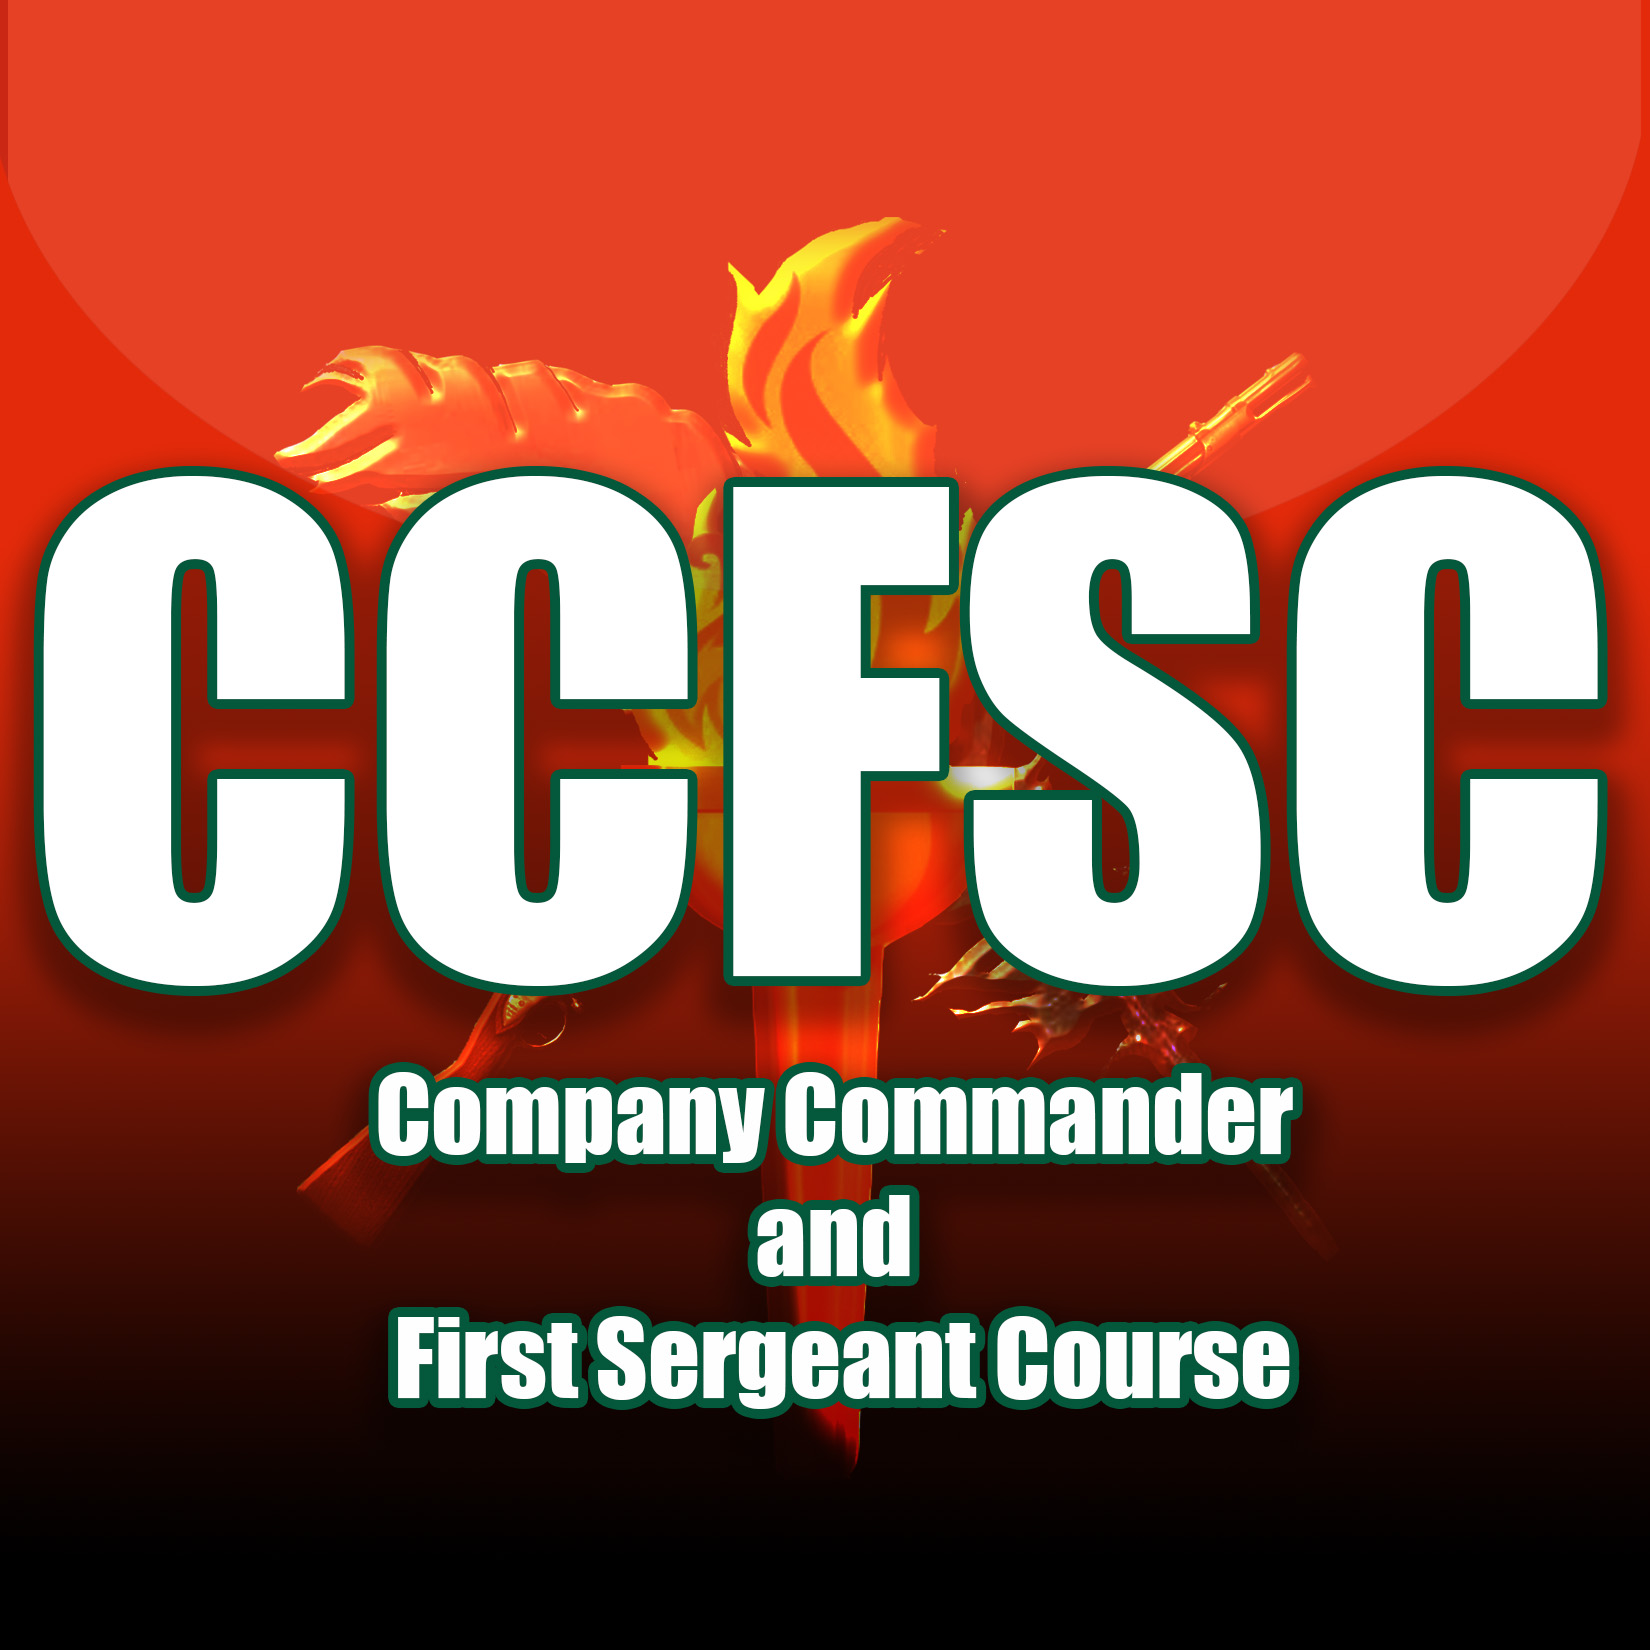 Company Command and First Sergeant Course